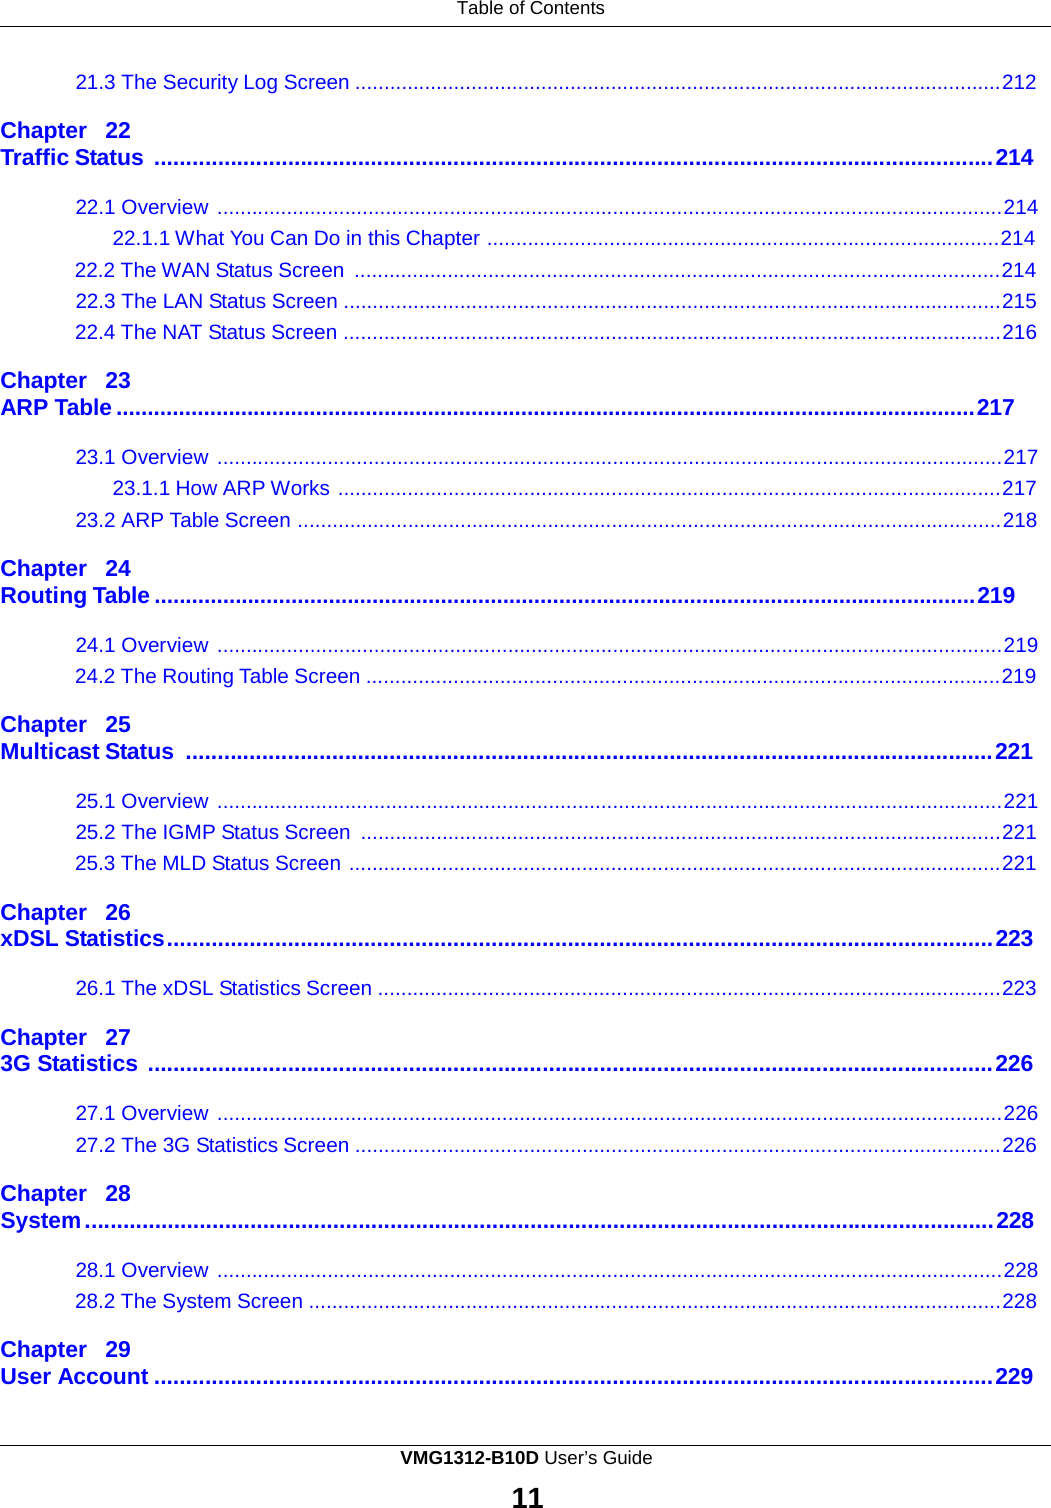 Table of Contents    21.3 The Security Log Screen ...............................................................................................................212  Chapter  22 Traffic Status .................................................................................................................................... 214  22.1 Overview .......................................................................................................................................214 22.1.1 What You Can Do in this Chapter ........................................................................................214 22.2 The WAN Status Screen ...............................................................................................................214 22.3 The LAN Status Screen .................................................................................................................215 22.4 The NAT Status Screen .................................................................................................................216  Chapter  23 ARP Table .......................................................................................................................................... 217  23.1 Overview .......................................................................................................................................217 23.1.1 How ARP Works ..................................................................................................................217 23.2 ARP Table Screen .........................................................................................................................218  Chapter  24 Routing Table .................................................................................................................................... 219  24.1 Overview .......................................................................................................................................219 24.2 The Routing Table Screen .............................................................................................................219  Chapter  25 Multicast Status ............................................................................................................................... 221  25.1 Overview .......................................................................................................................................221 25.2 The IGMP Status Screen  ..............................................................................................................221 25.3 The MLD Status Screen ................................................................................................................221  Chapter  26 xDSL Statistics .................................................................................................................................. 223  26.1 The xDSL Statistics Screen ...........................................................................................................223  Chapter  27 3G Statistics ..................................................................................................................................... 226  27.1 Overview .......................................................................................................................................226 27.2 The 3G Statistics Screen ...............................................................................................................226  Chapter  28 System ............................................................................................................................................... 228  28.1 Overview .......................................................................................................................................228 28.2 The System Screen .......................................................................................................................228  Chapter  29 User Account .................................................................................................................................... 229 VMG1312-B10D User’s Guide  11  